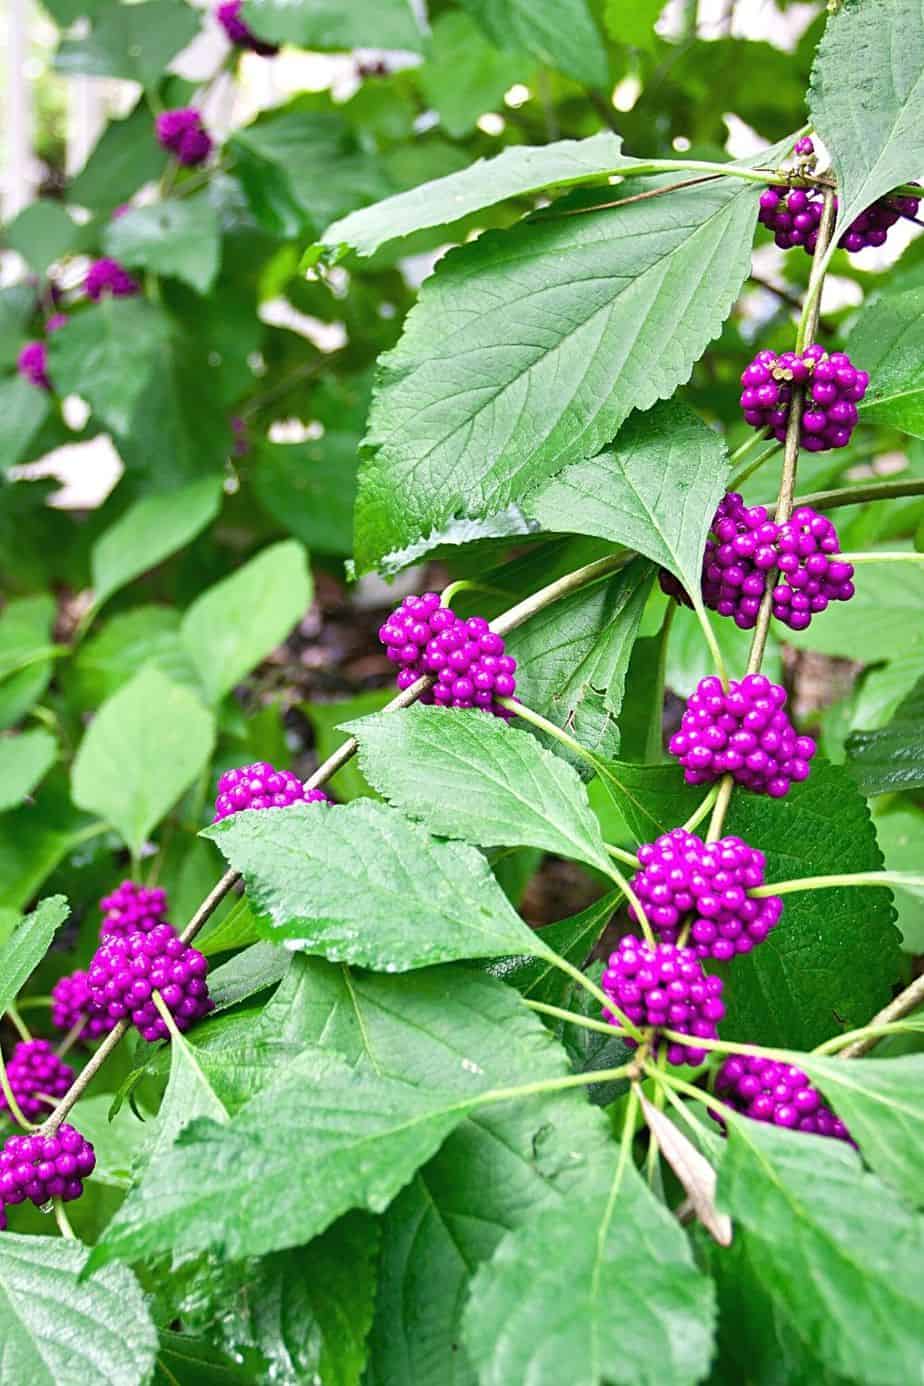 If you're looking for a low-maintenance shrub that you can grow on the west-facing side of the house, then plant the American Beautyberry